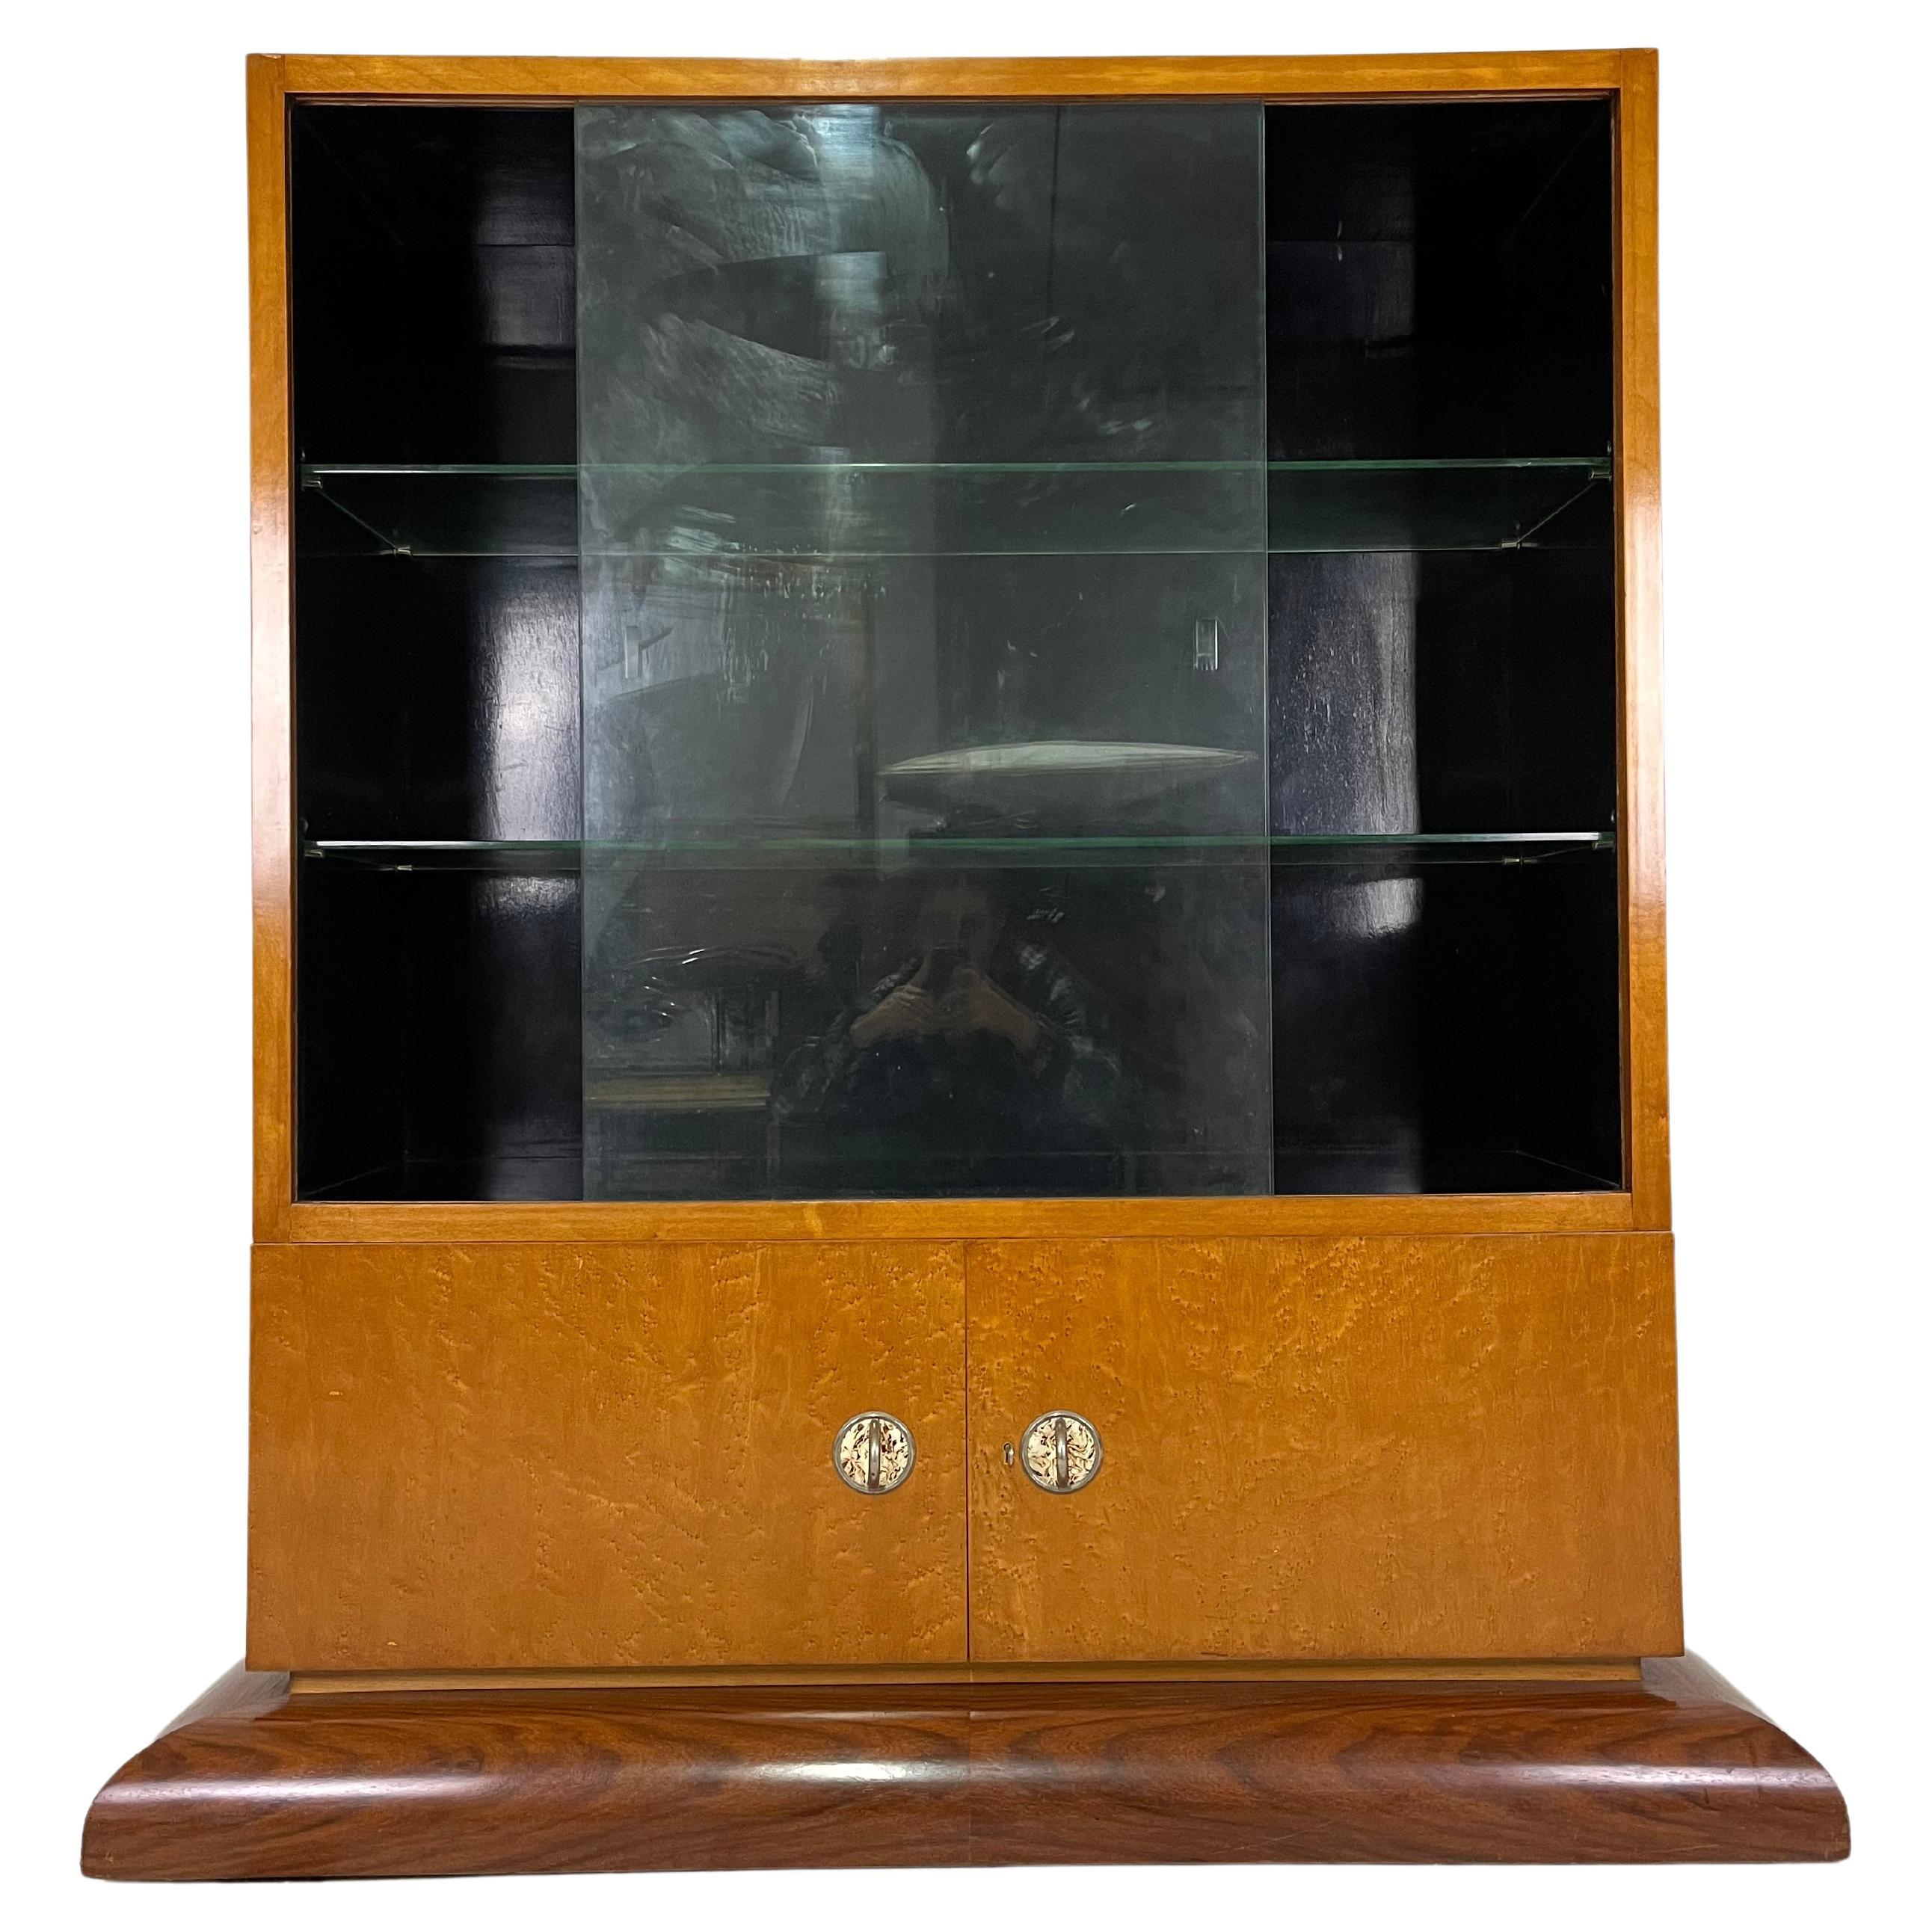 Showcase briar wood glass deco 60' years For Sale